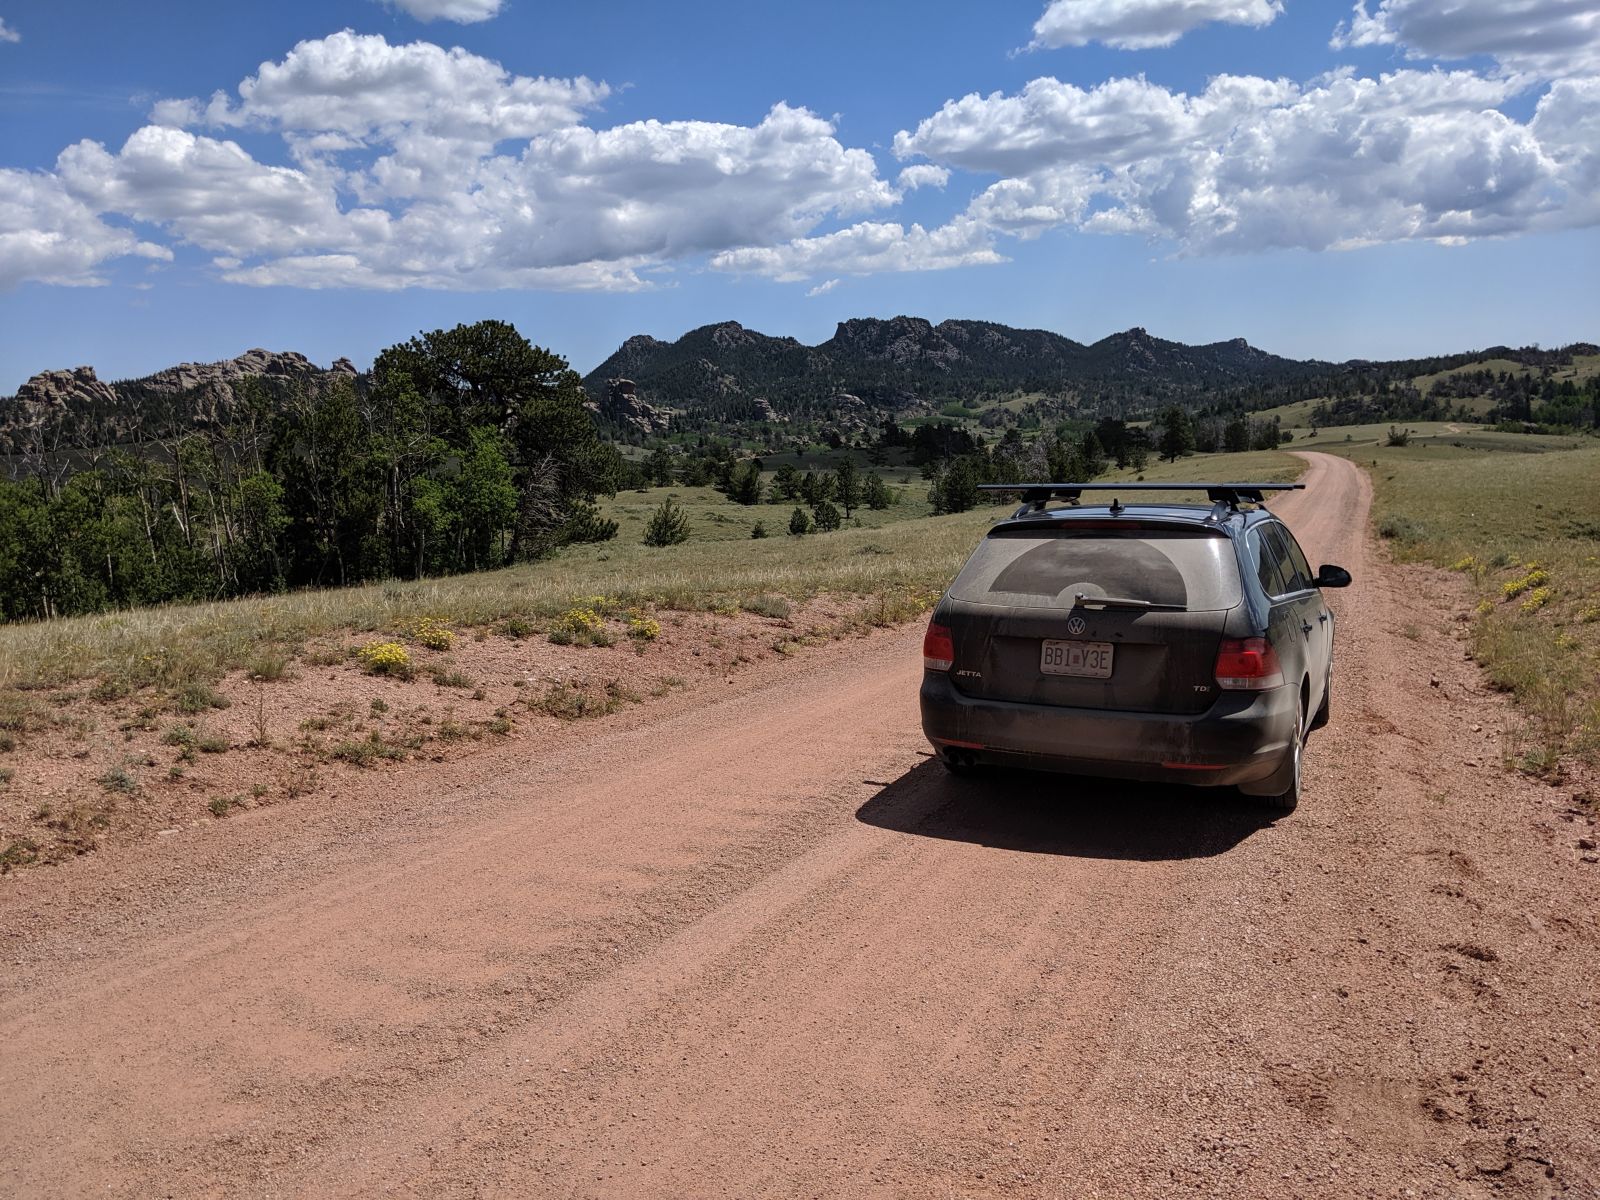 The Sportwagen saw a lot of gravel roads and did awesome other than needing a touch more ground clearance